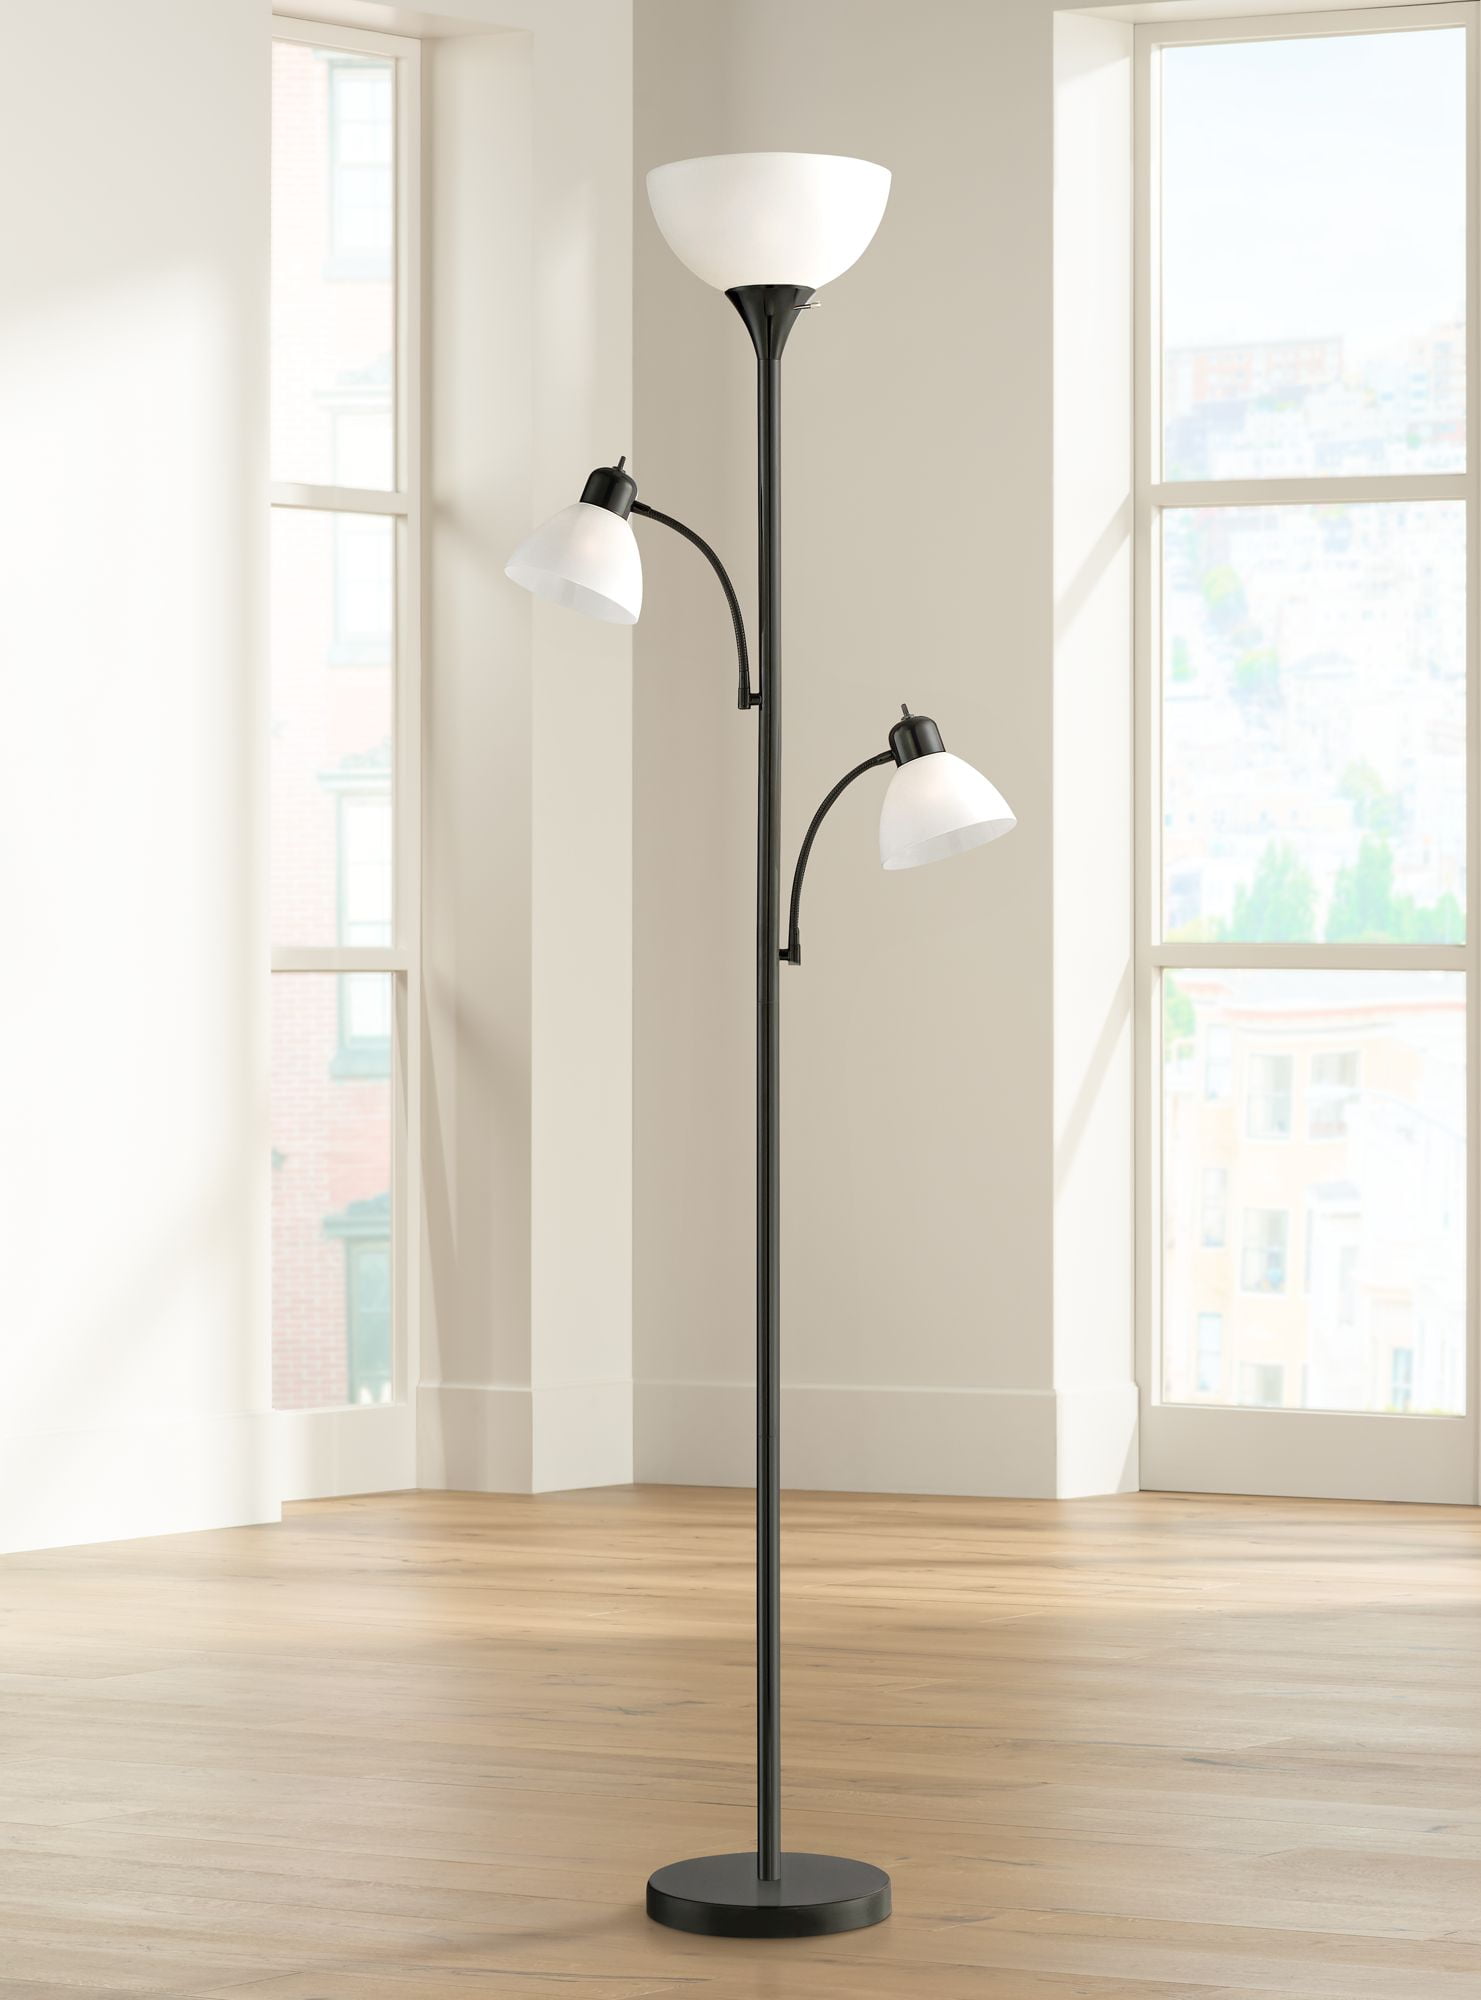 Led Torchiere Floor Lamp Bedrooms Living Room Light Reading Office Home Decor 